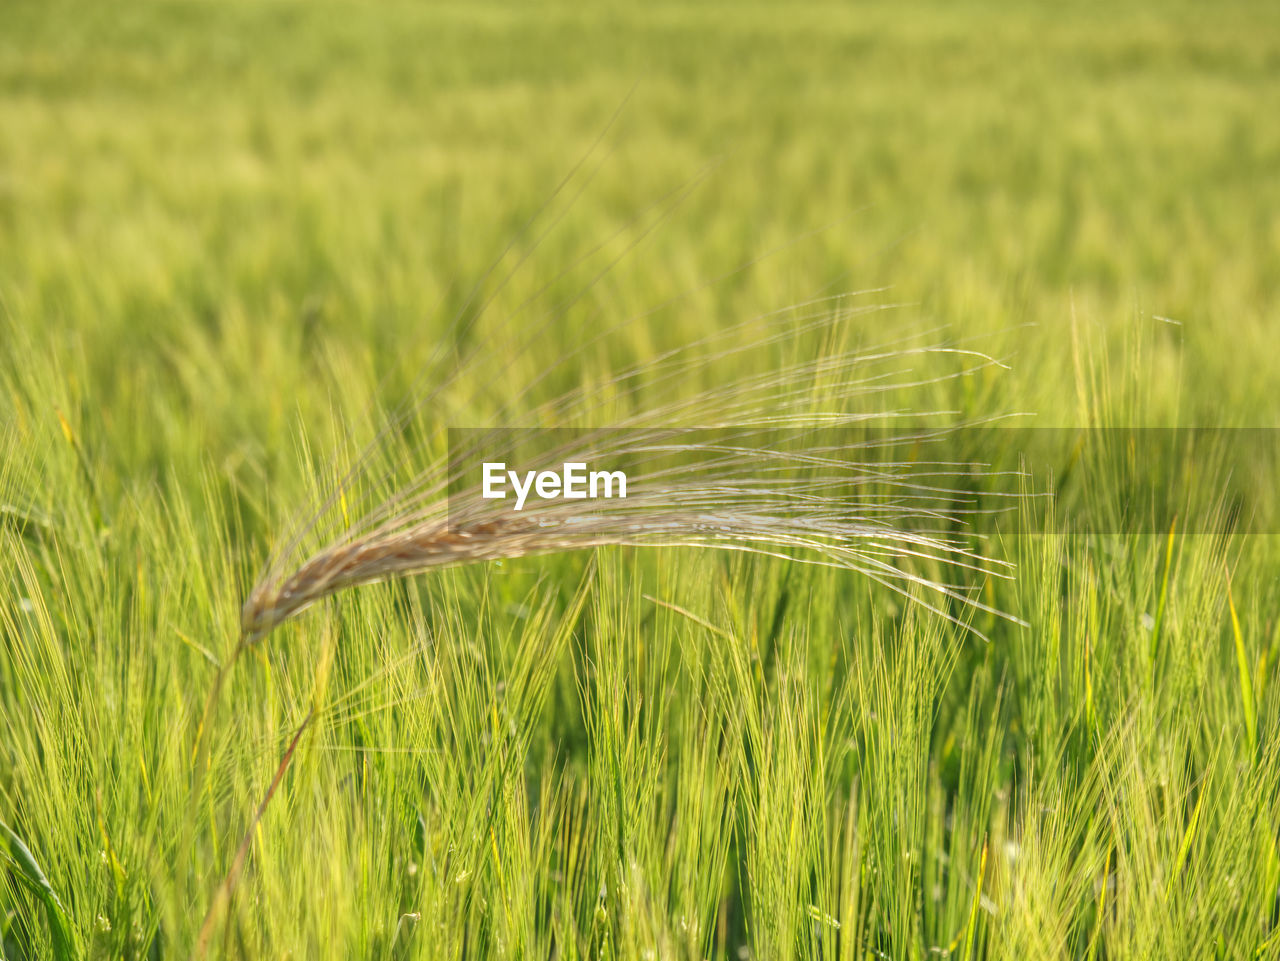 Detail of rye or barley corn grown on field. concept for agriculture and nature